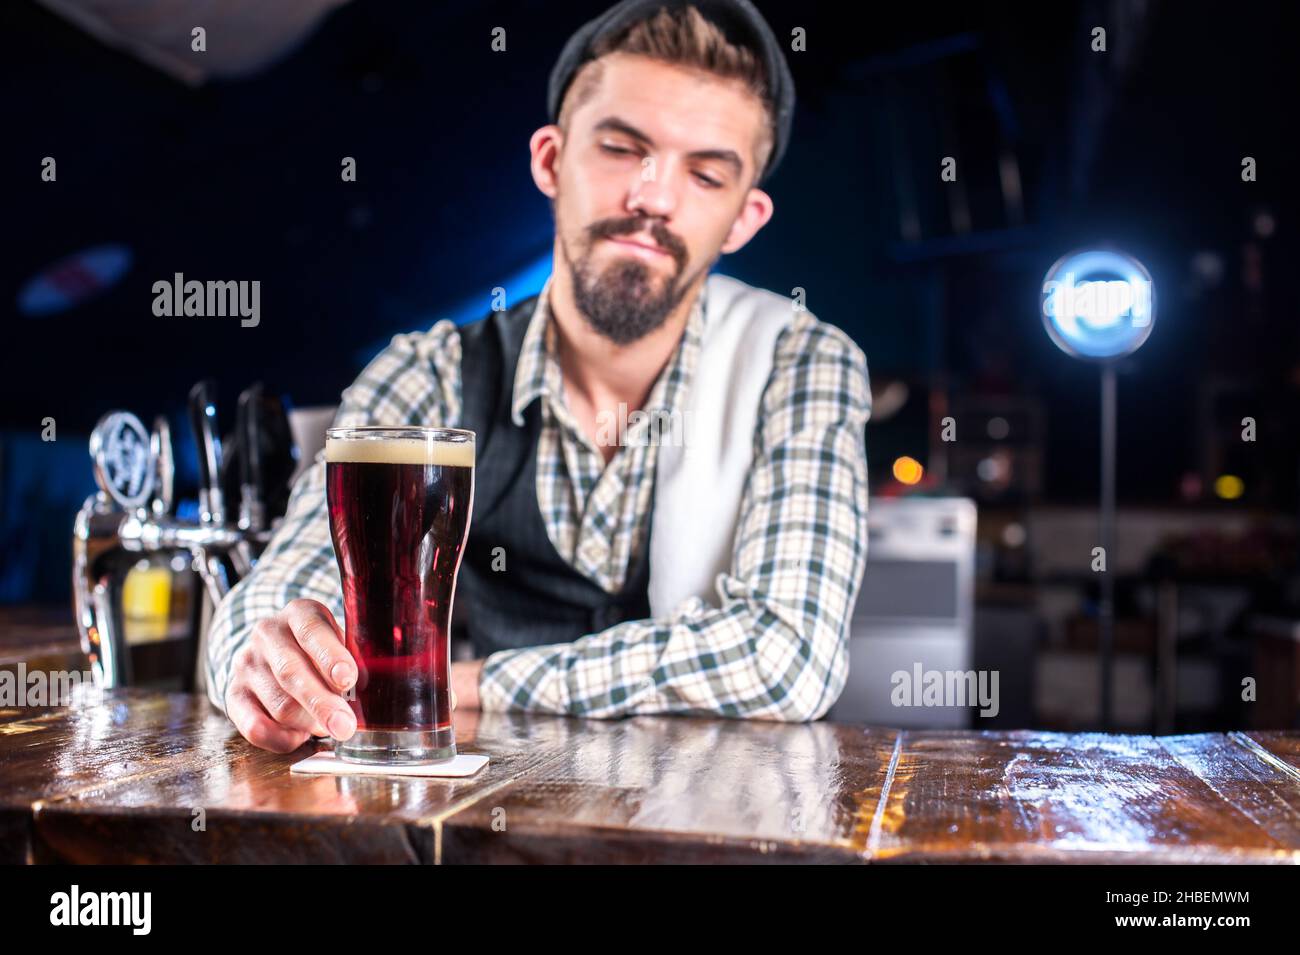 Young bartender demonstrates his professional skills Stock Photo - Alamy